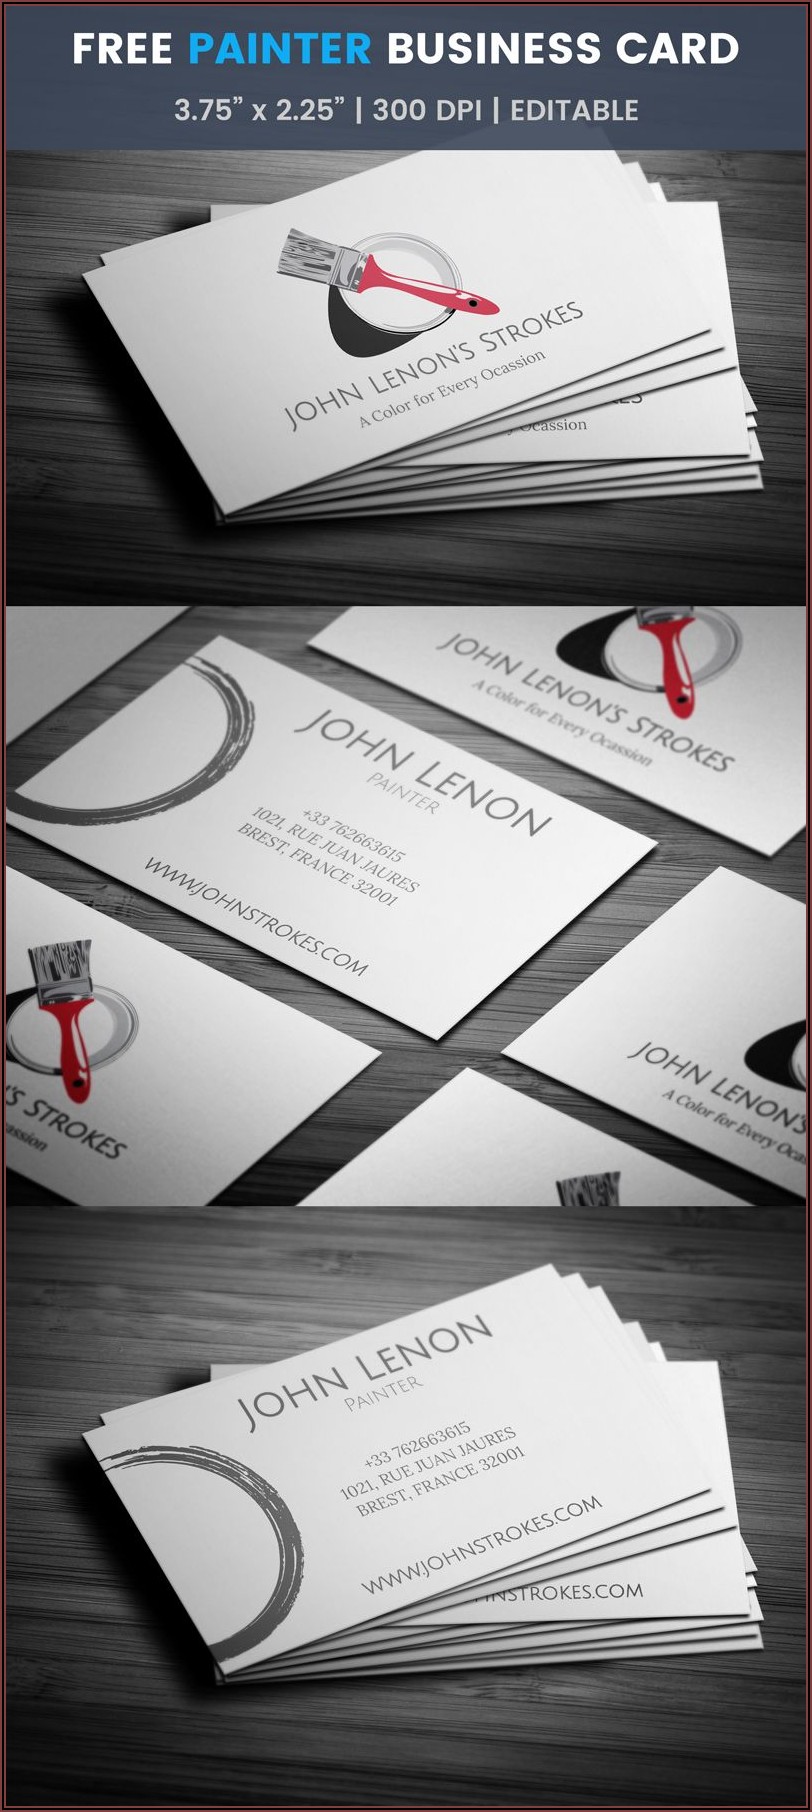 Painter Business Card Template Free